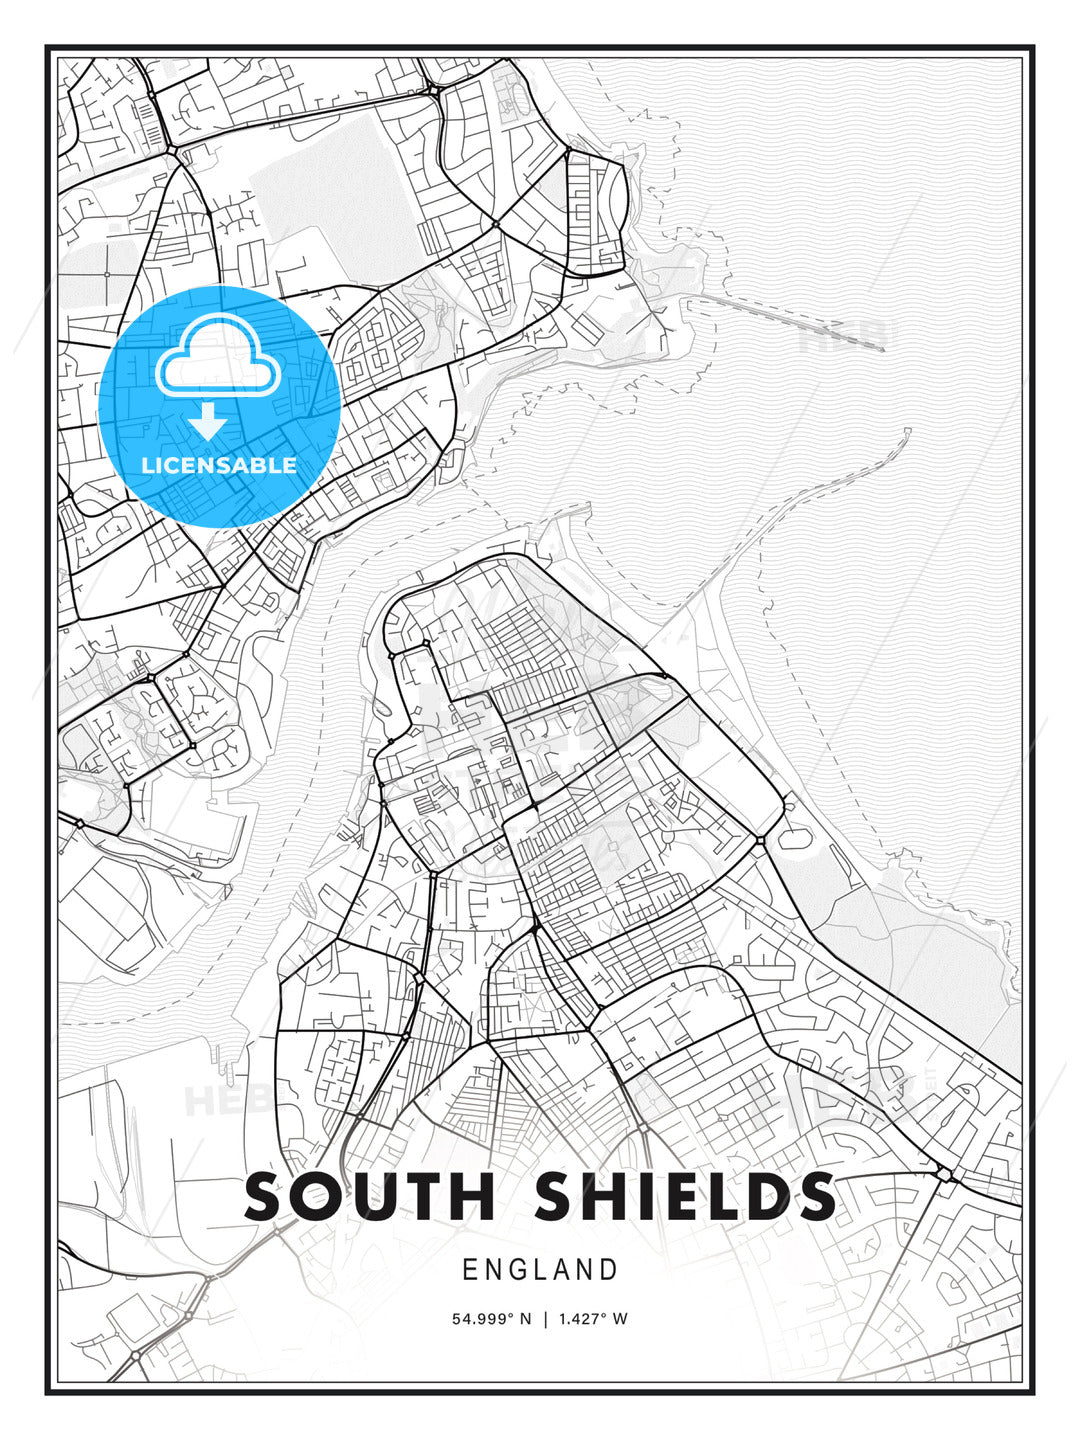 South Shields, England, Modern Print Template in Various Formats - HEBSTREITS Sketches